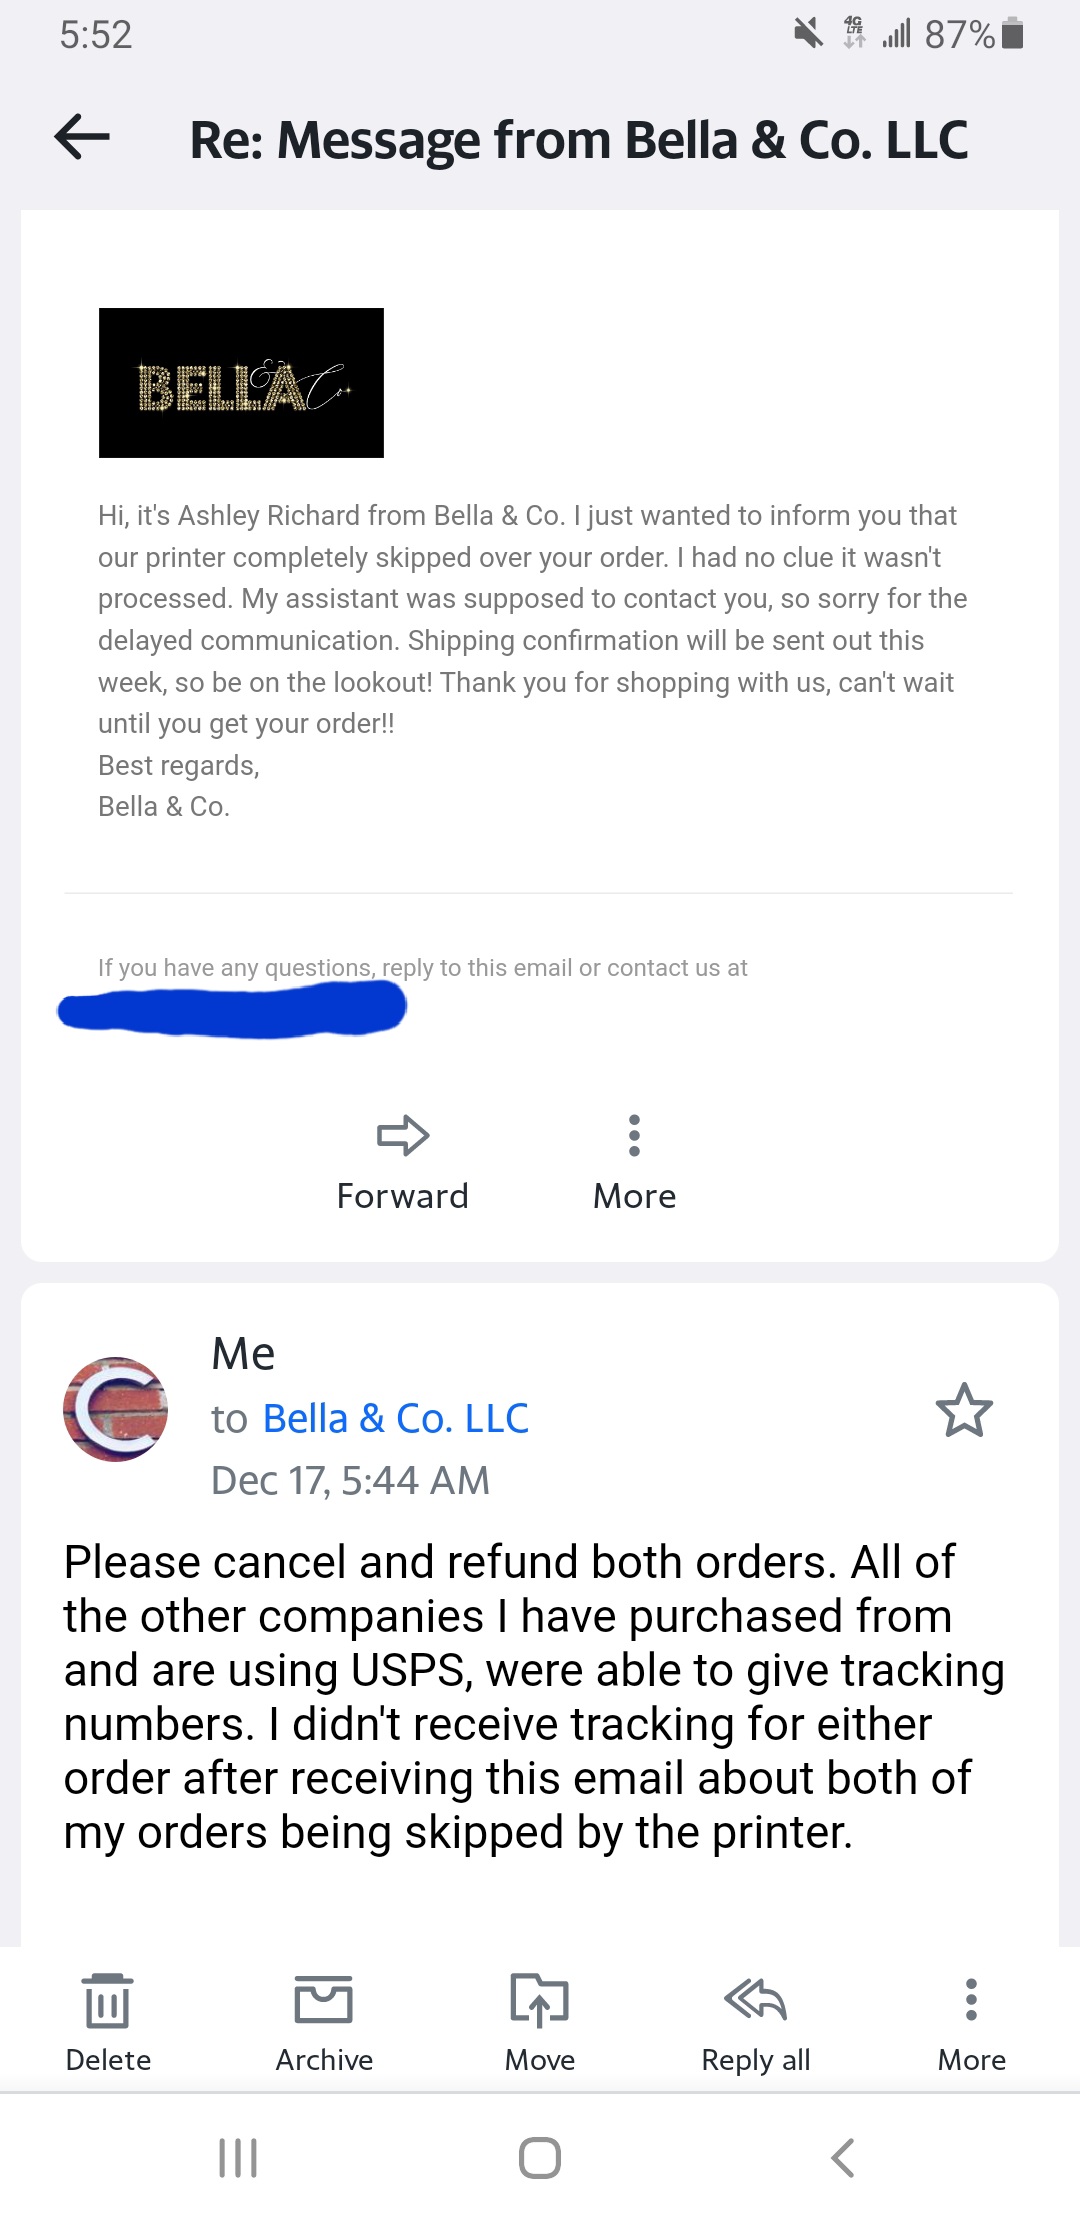 Email asking for refund